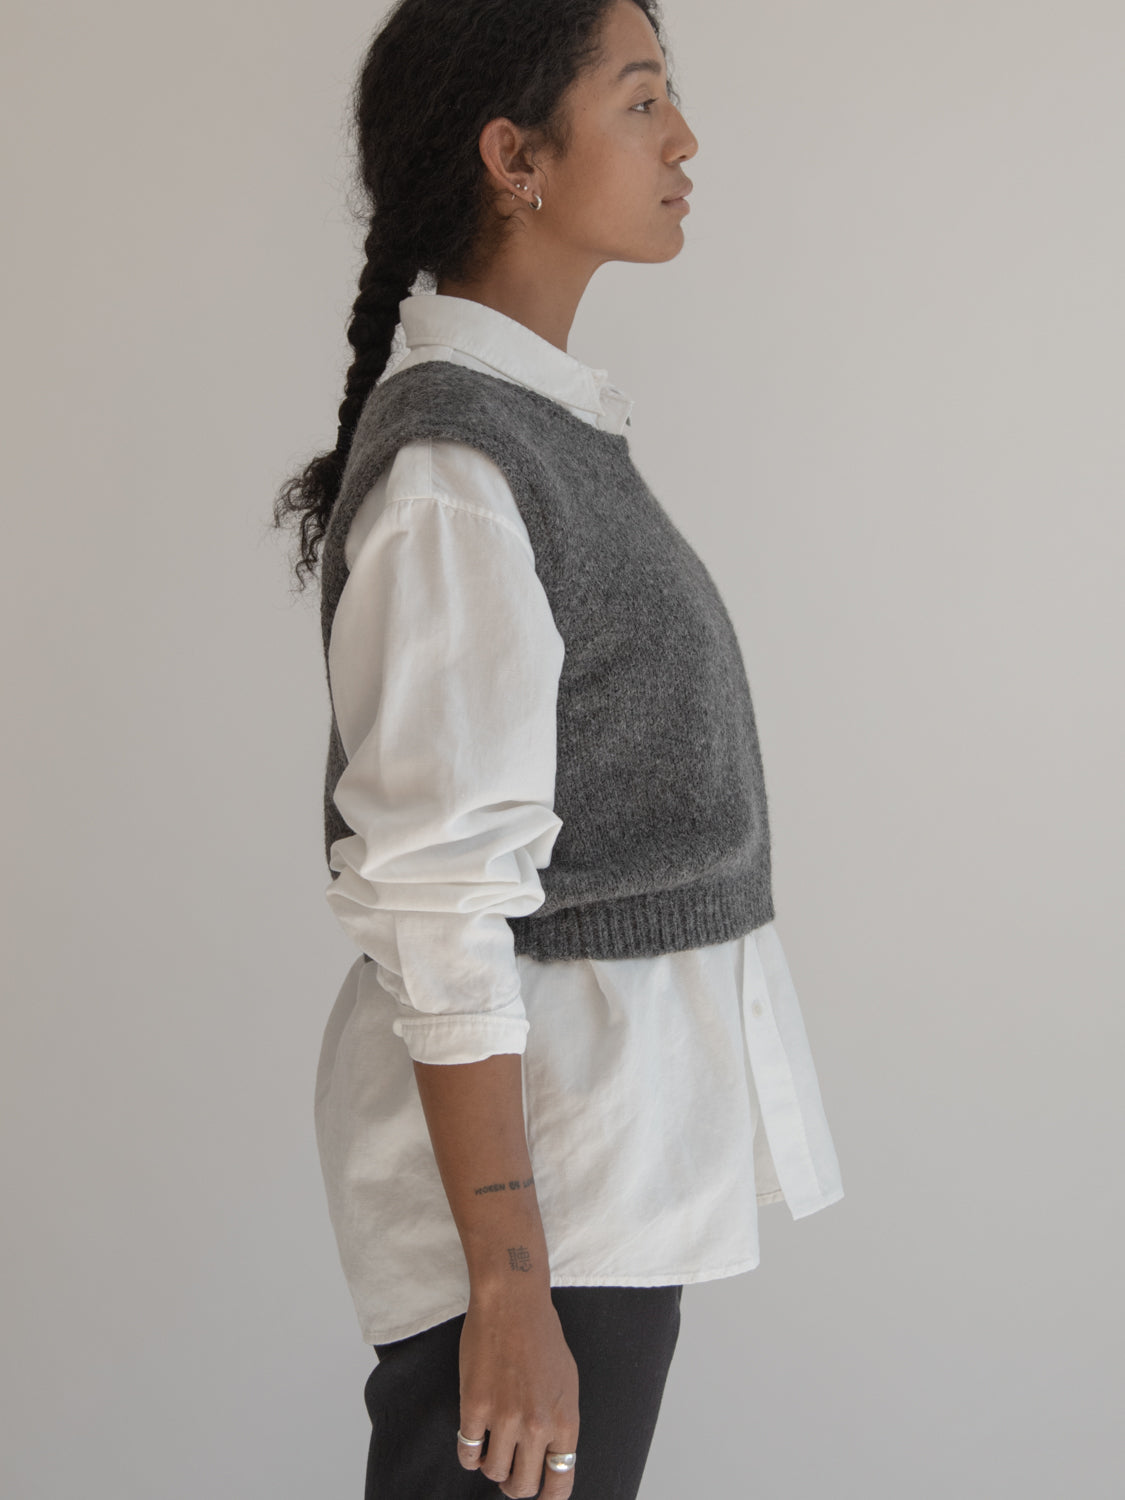 Briar Knit Vest in Charcoal